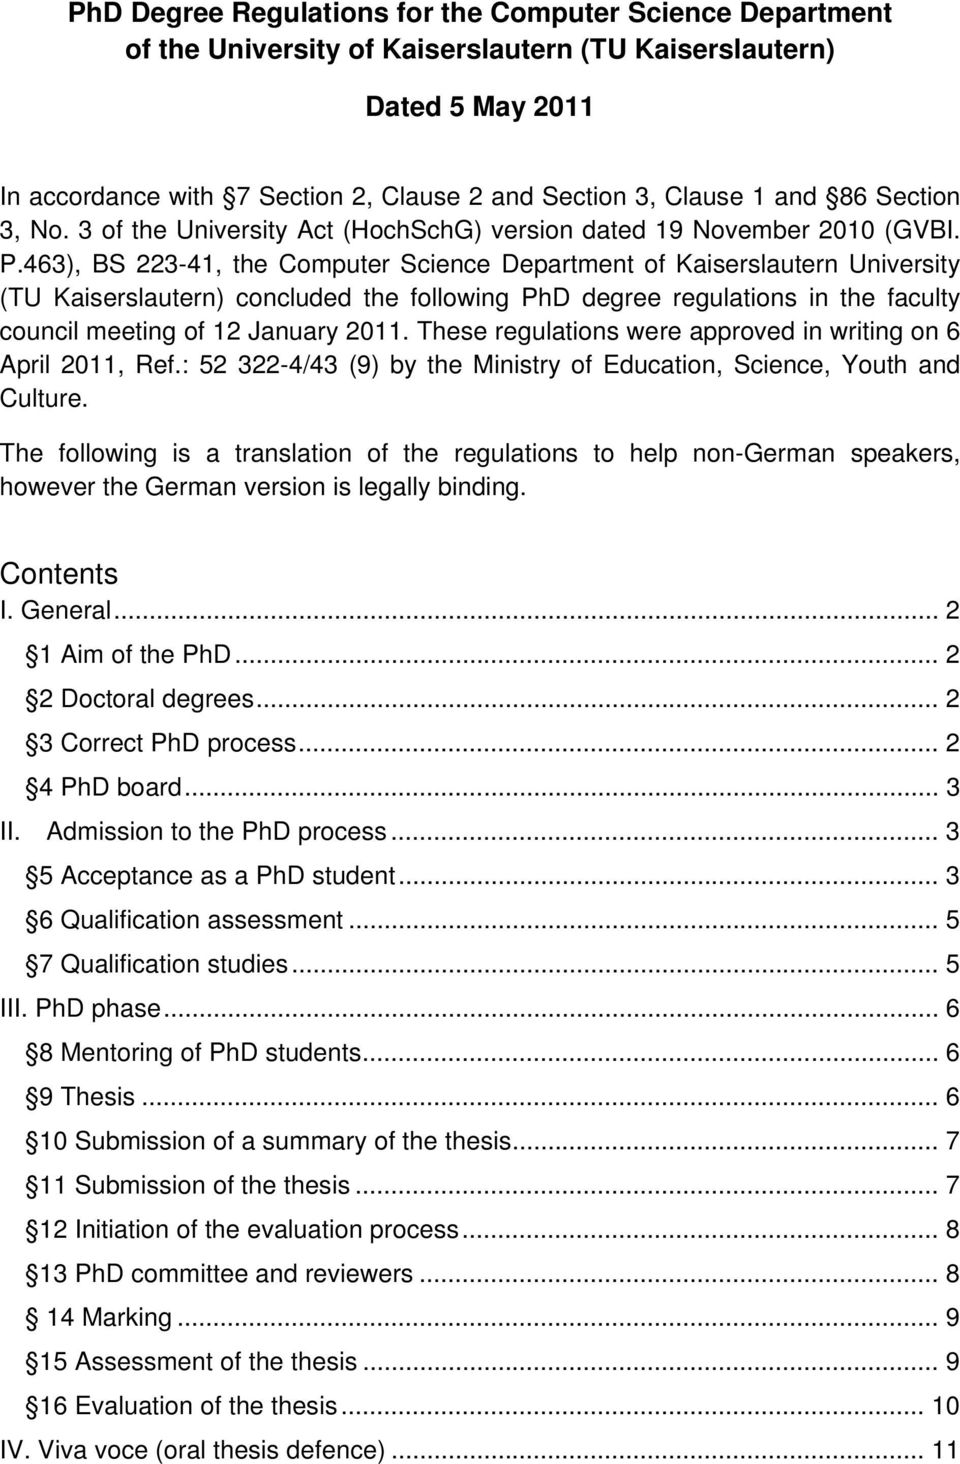 463), BS 223-41, the Computer Science Department of Kaiserslautern University (TU Kaiserslautern) concluded the following PhD degree regulations in the faculty council meeting of 12 January 2011.